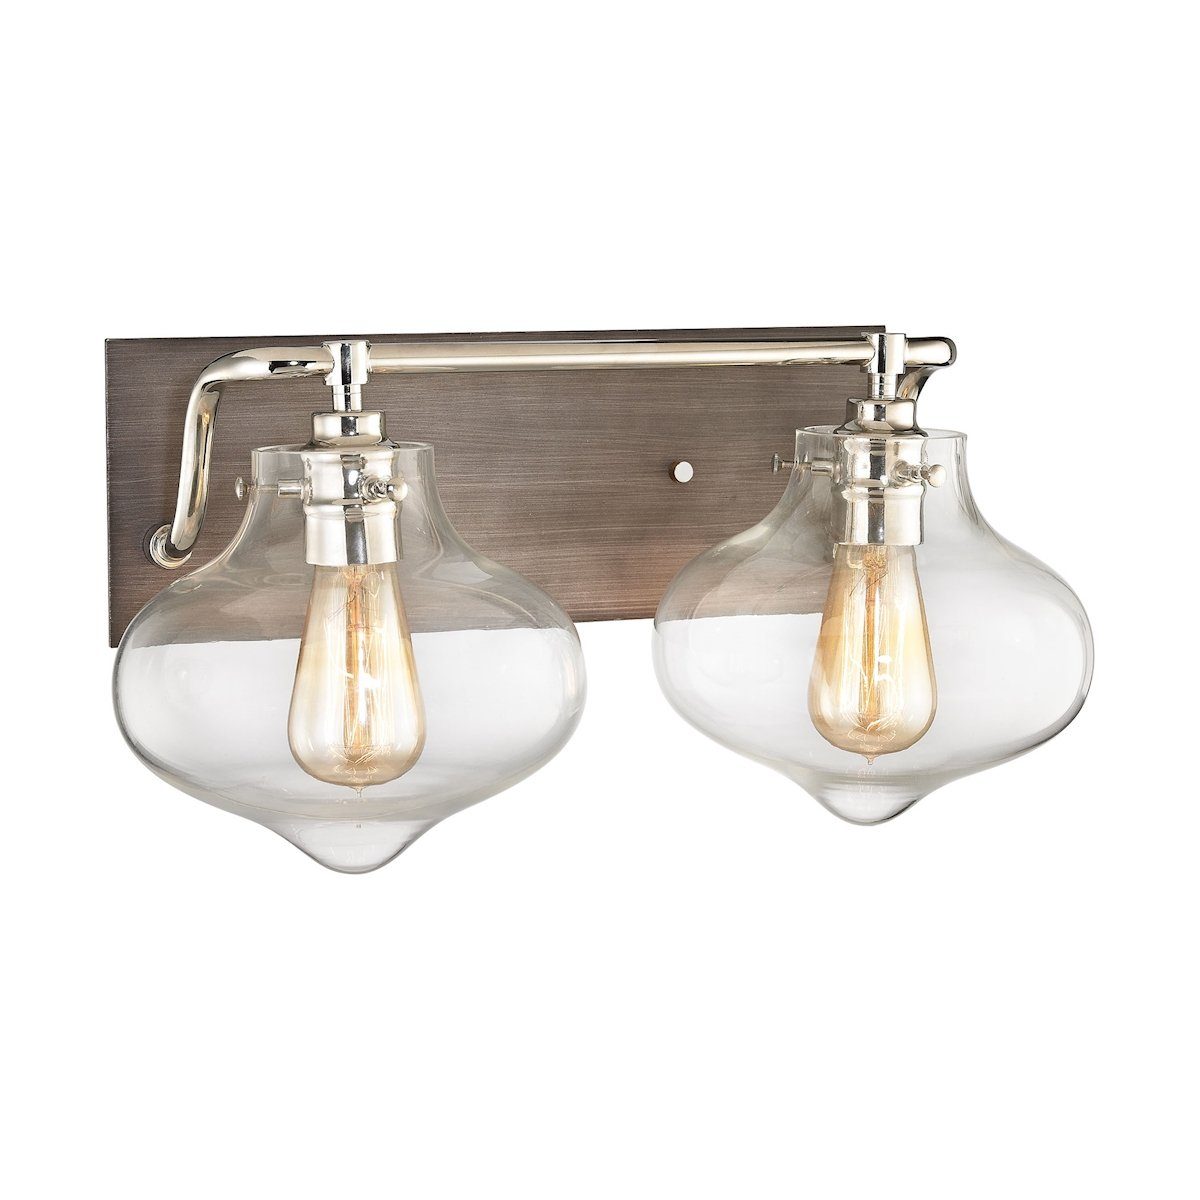 Kelsey 2 Light Vanity In Weathered Zinc With Polished Nickel Accents Wall Elk Lighting 